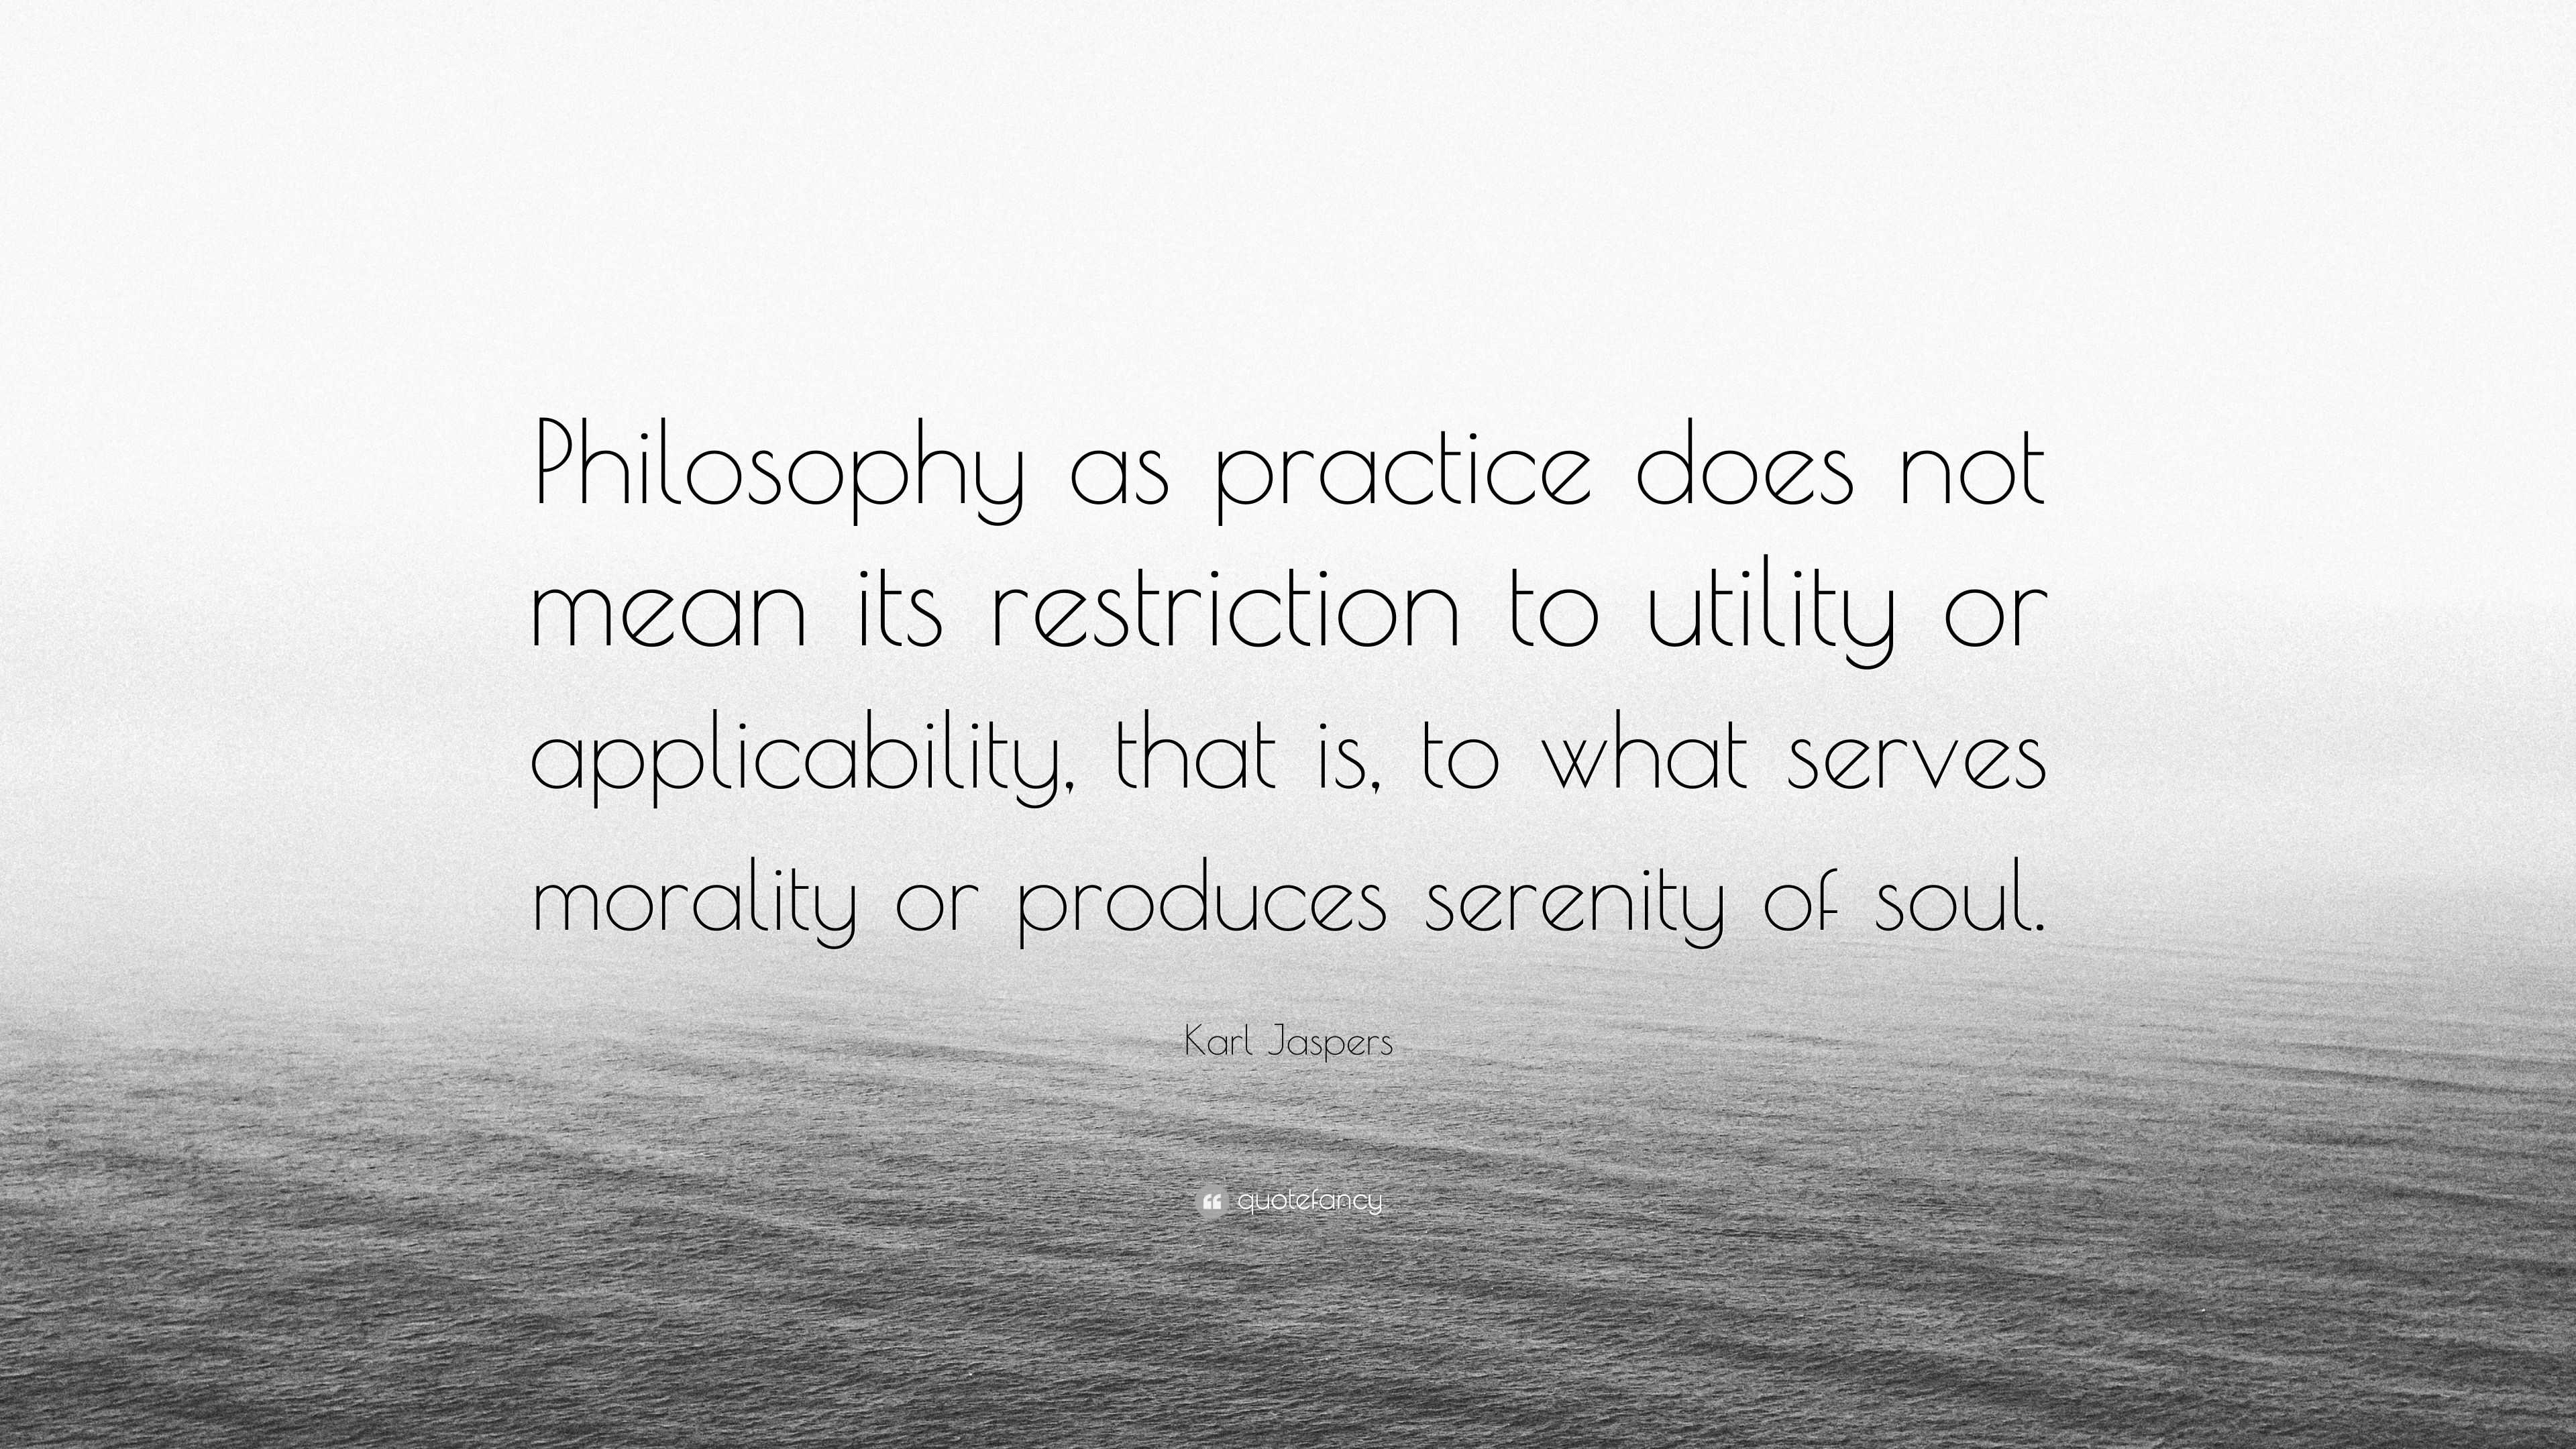 Karl Jaspers Quote: “Philosophy as practice does not mean its ...